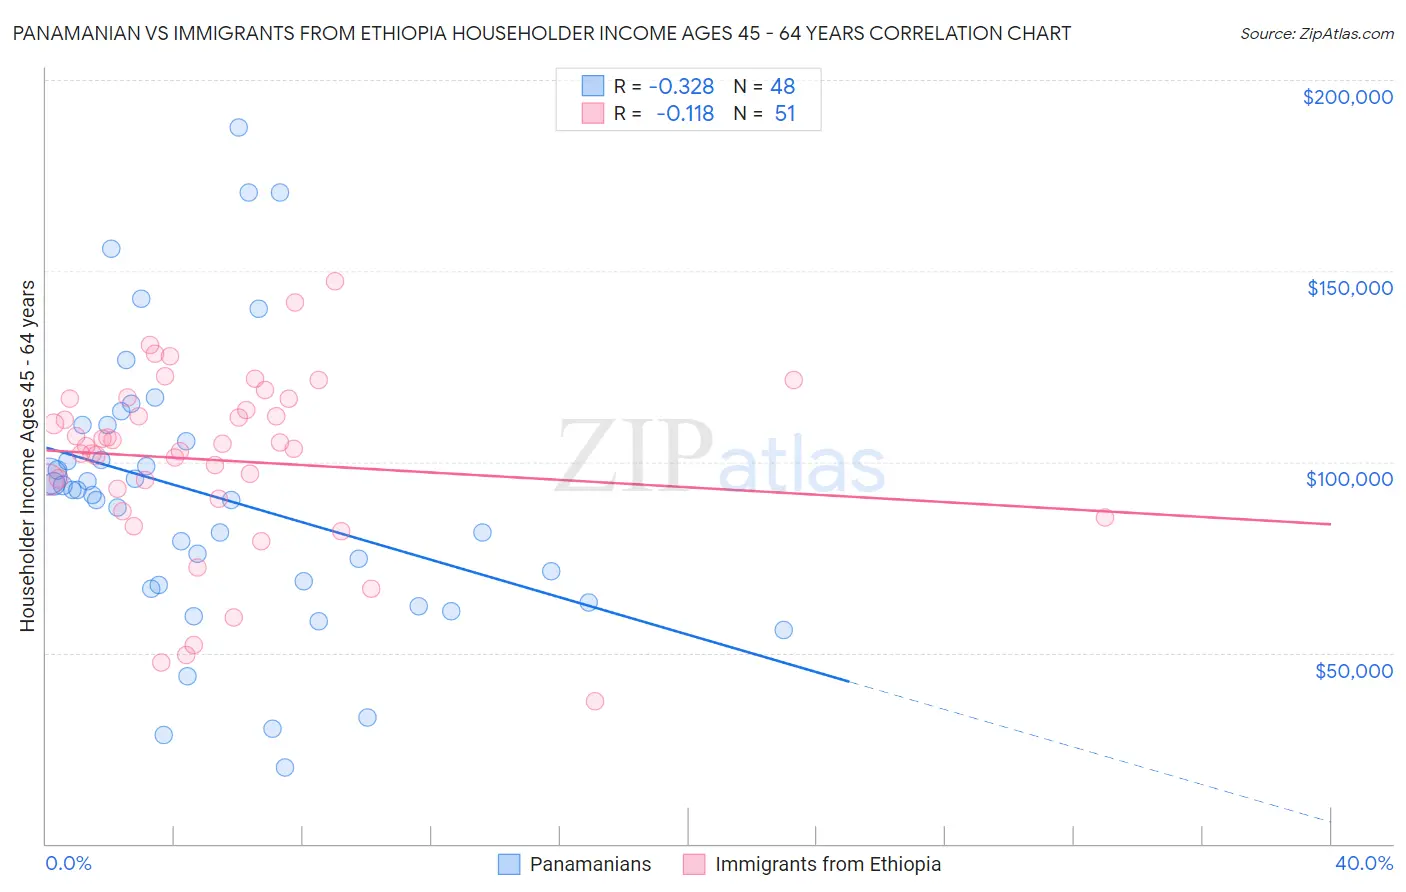 Panamanian vs Immigrants from Ethiopia Householder Income Ages 45 - 64 years